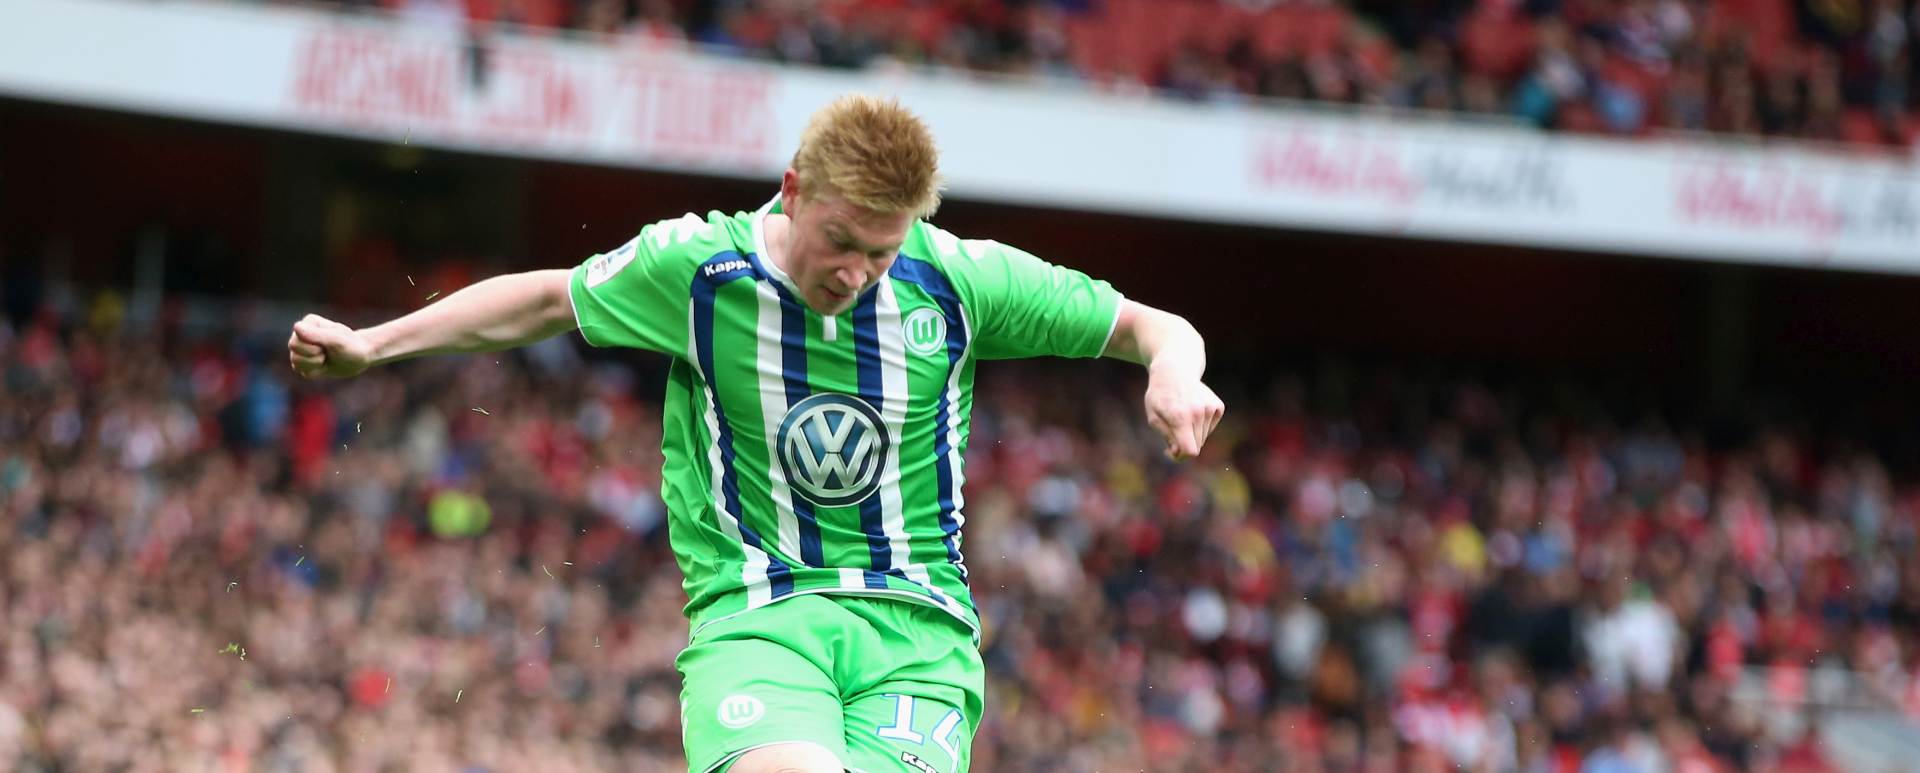 LONDON, ENGLAND - JULY 26:  Kevin de Bruyne of Wolfsburg passes the ball during the Emirates Cup match between Arsenal and VfL Wolfsburg at the Emirates Stadium on July 26, 2015 in London, England.  (Photo by David Rogers/Getty Images)